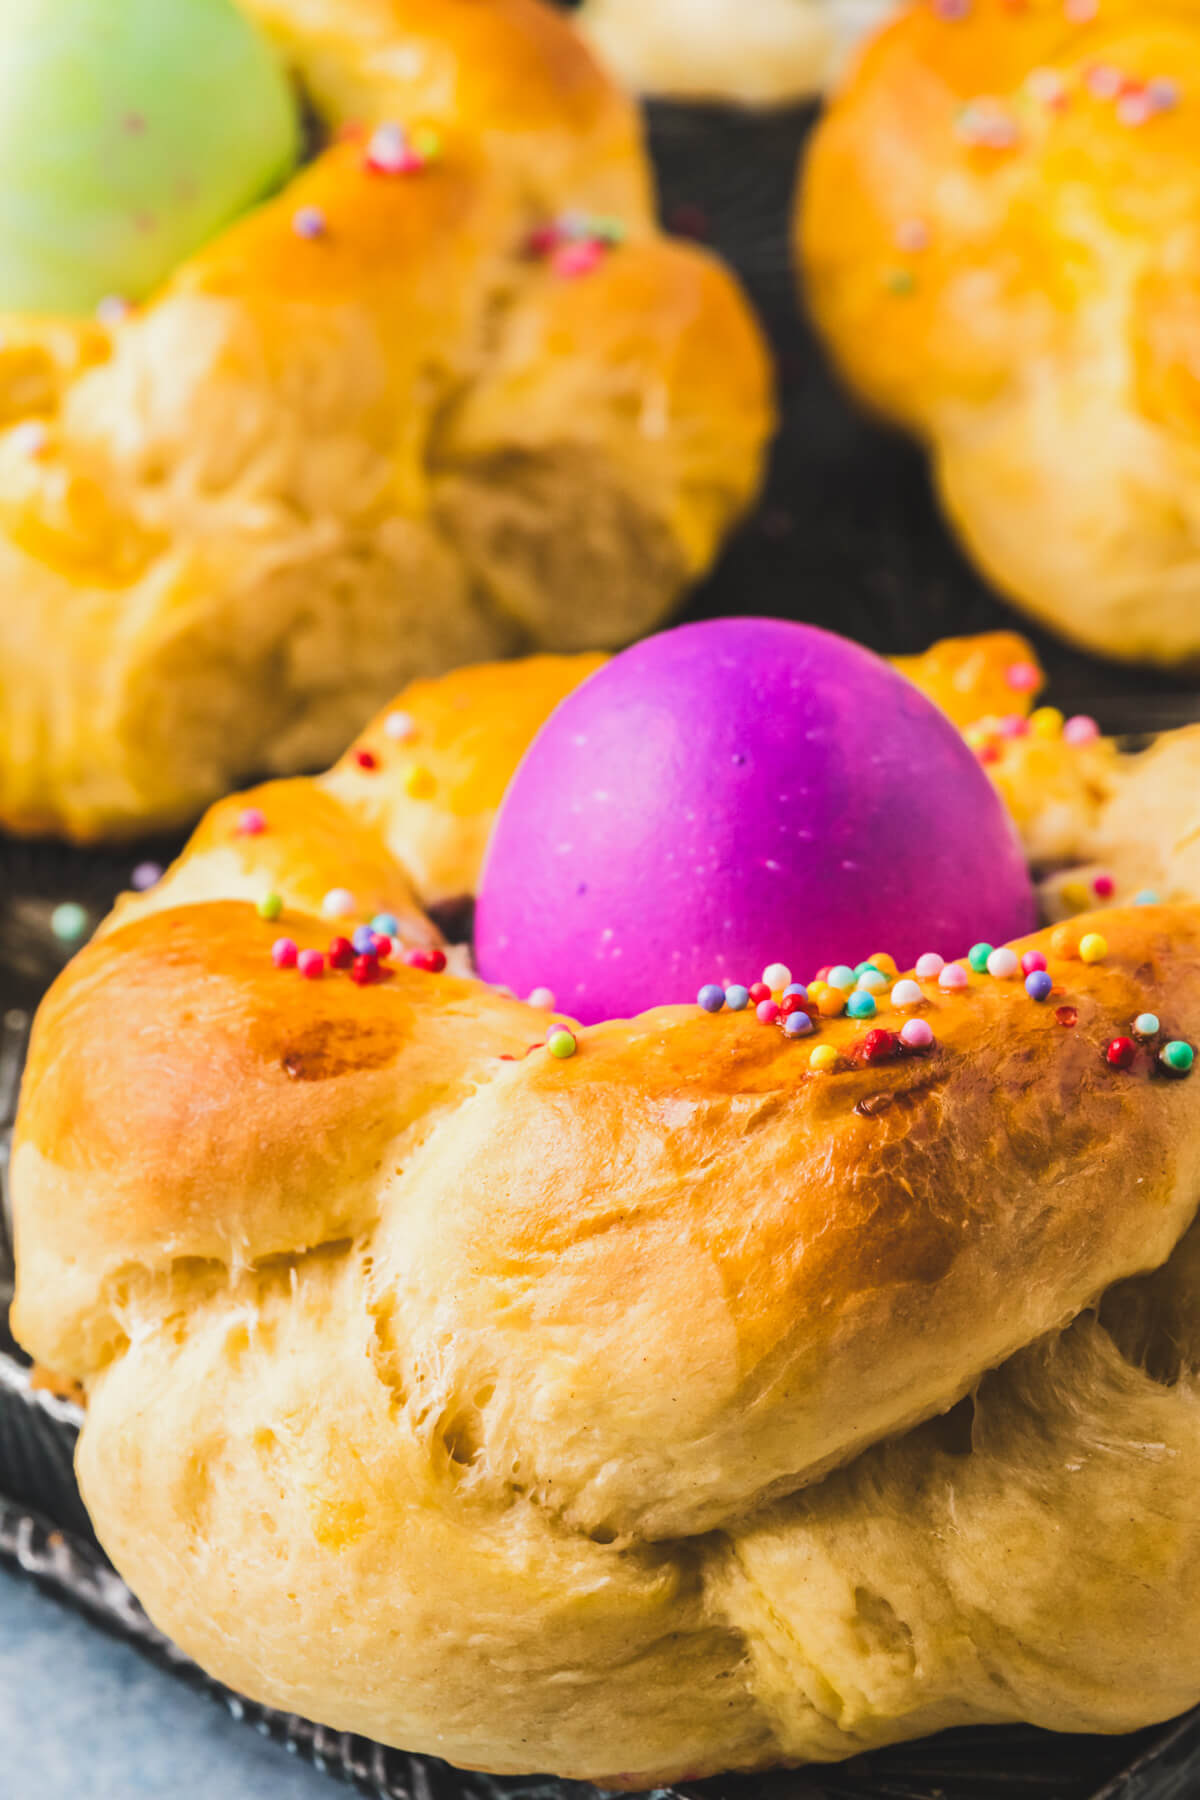 One golden baked Italian Easter Bread filled with a bright purple coloured Easter egg on a baking sheet.